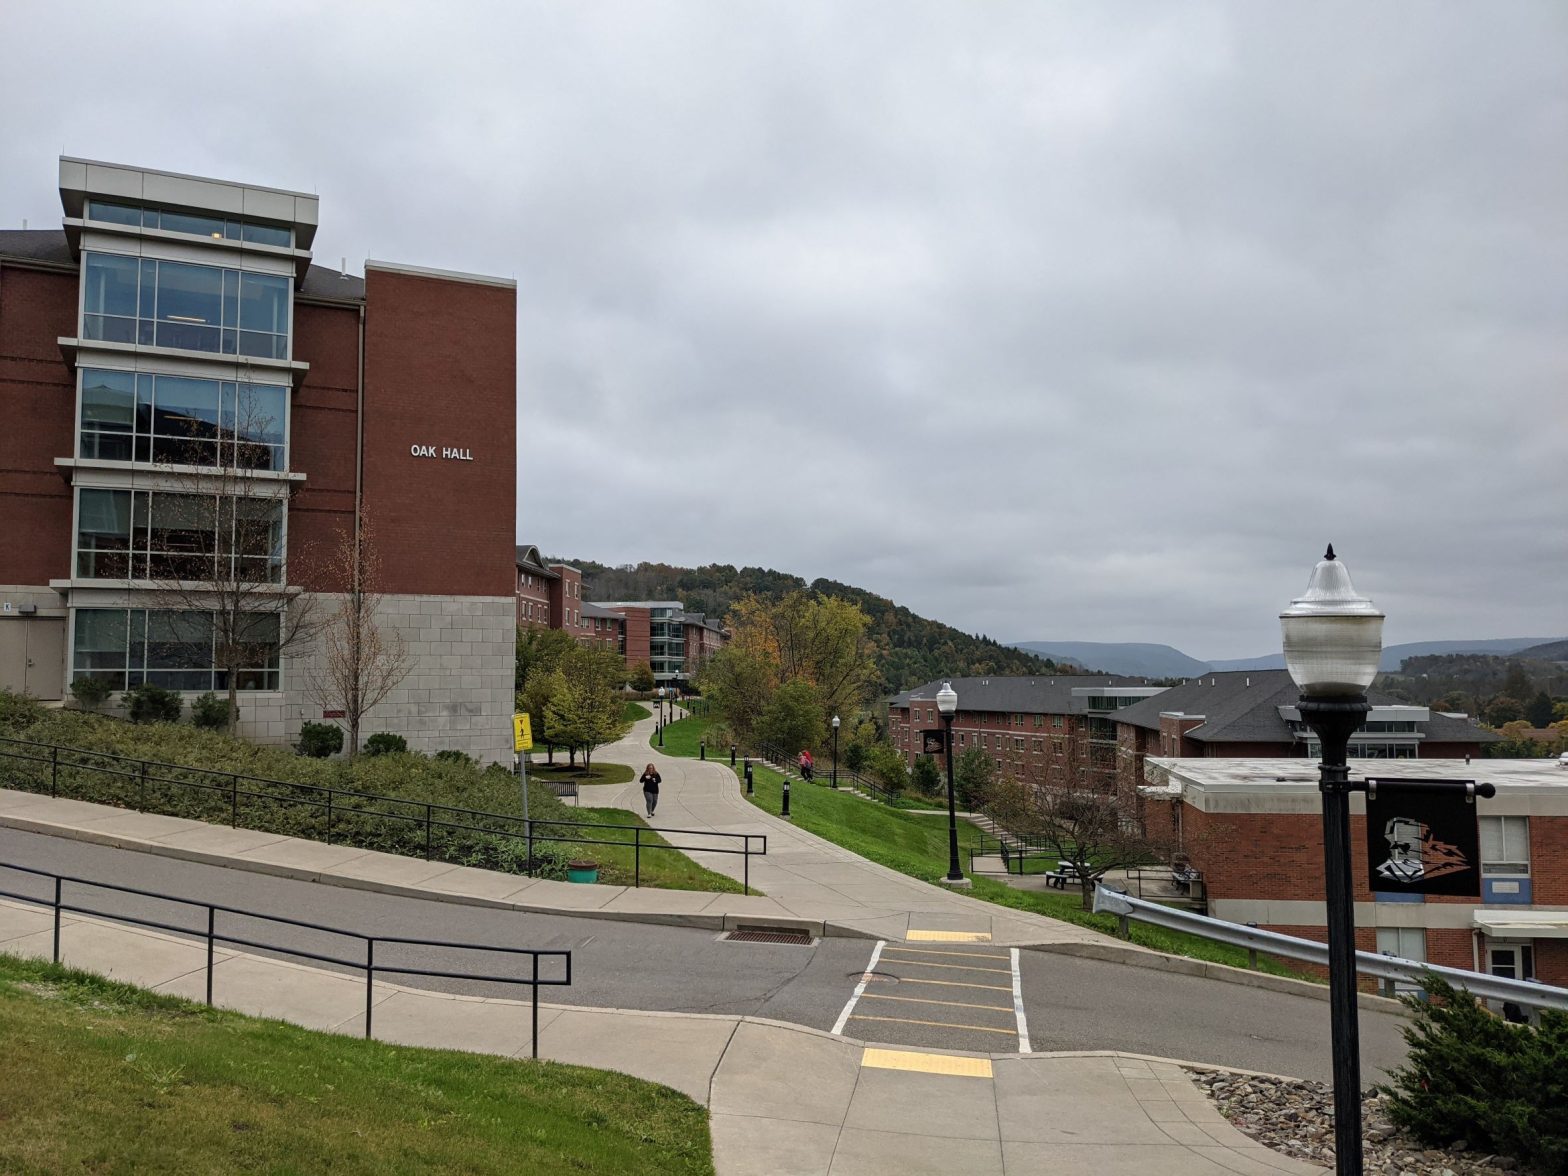 Glass Box projecting from contemporary red brick with stone base living learning student housing community dormitory building overlooking sidewalk above steep hillside with another red brick dormitory building below, mountains in the background